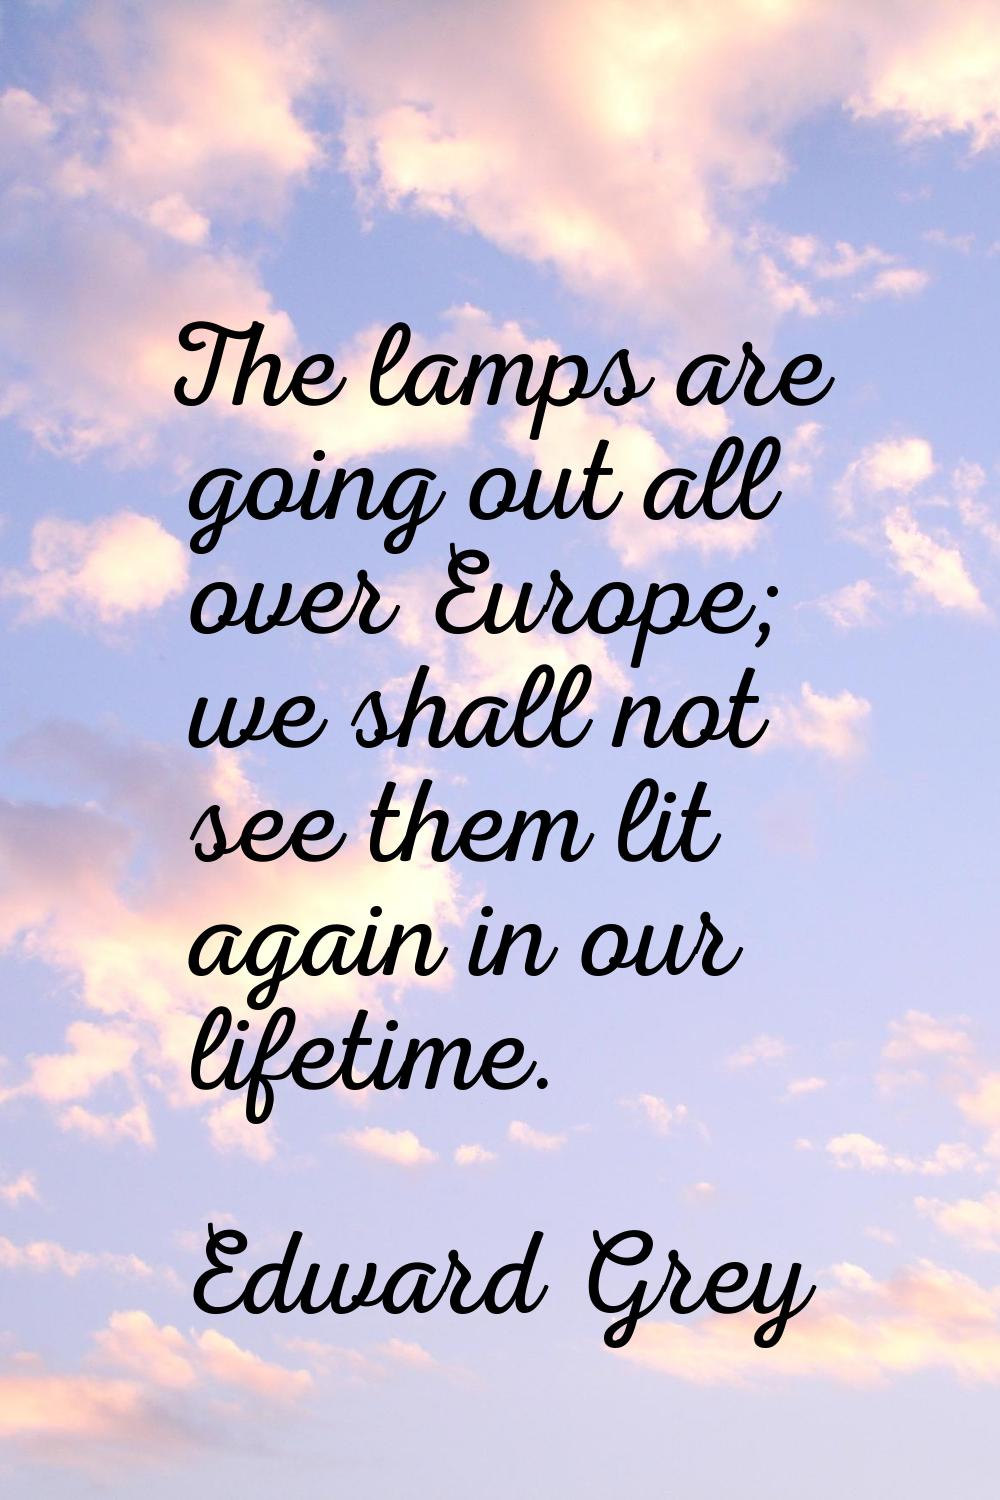 The lamps are going out all over Europe; we shall not see them lit again in our lifetime.